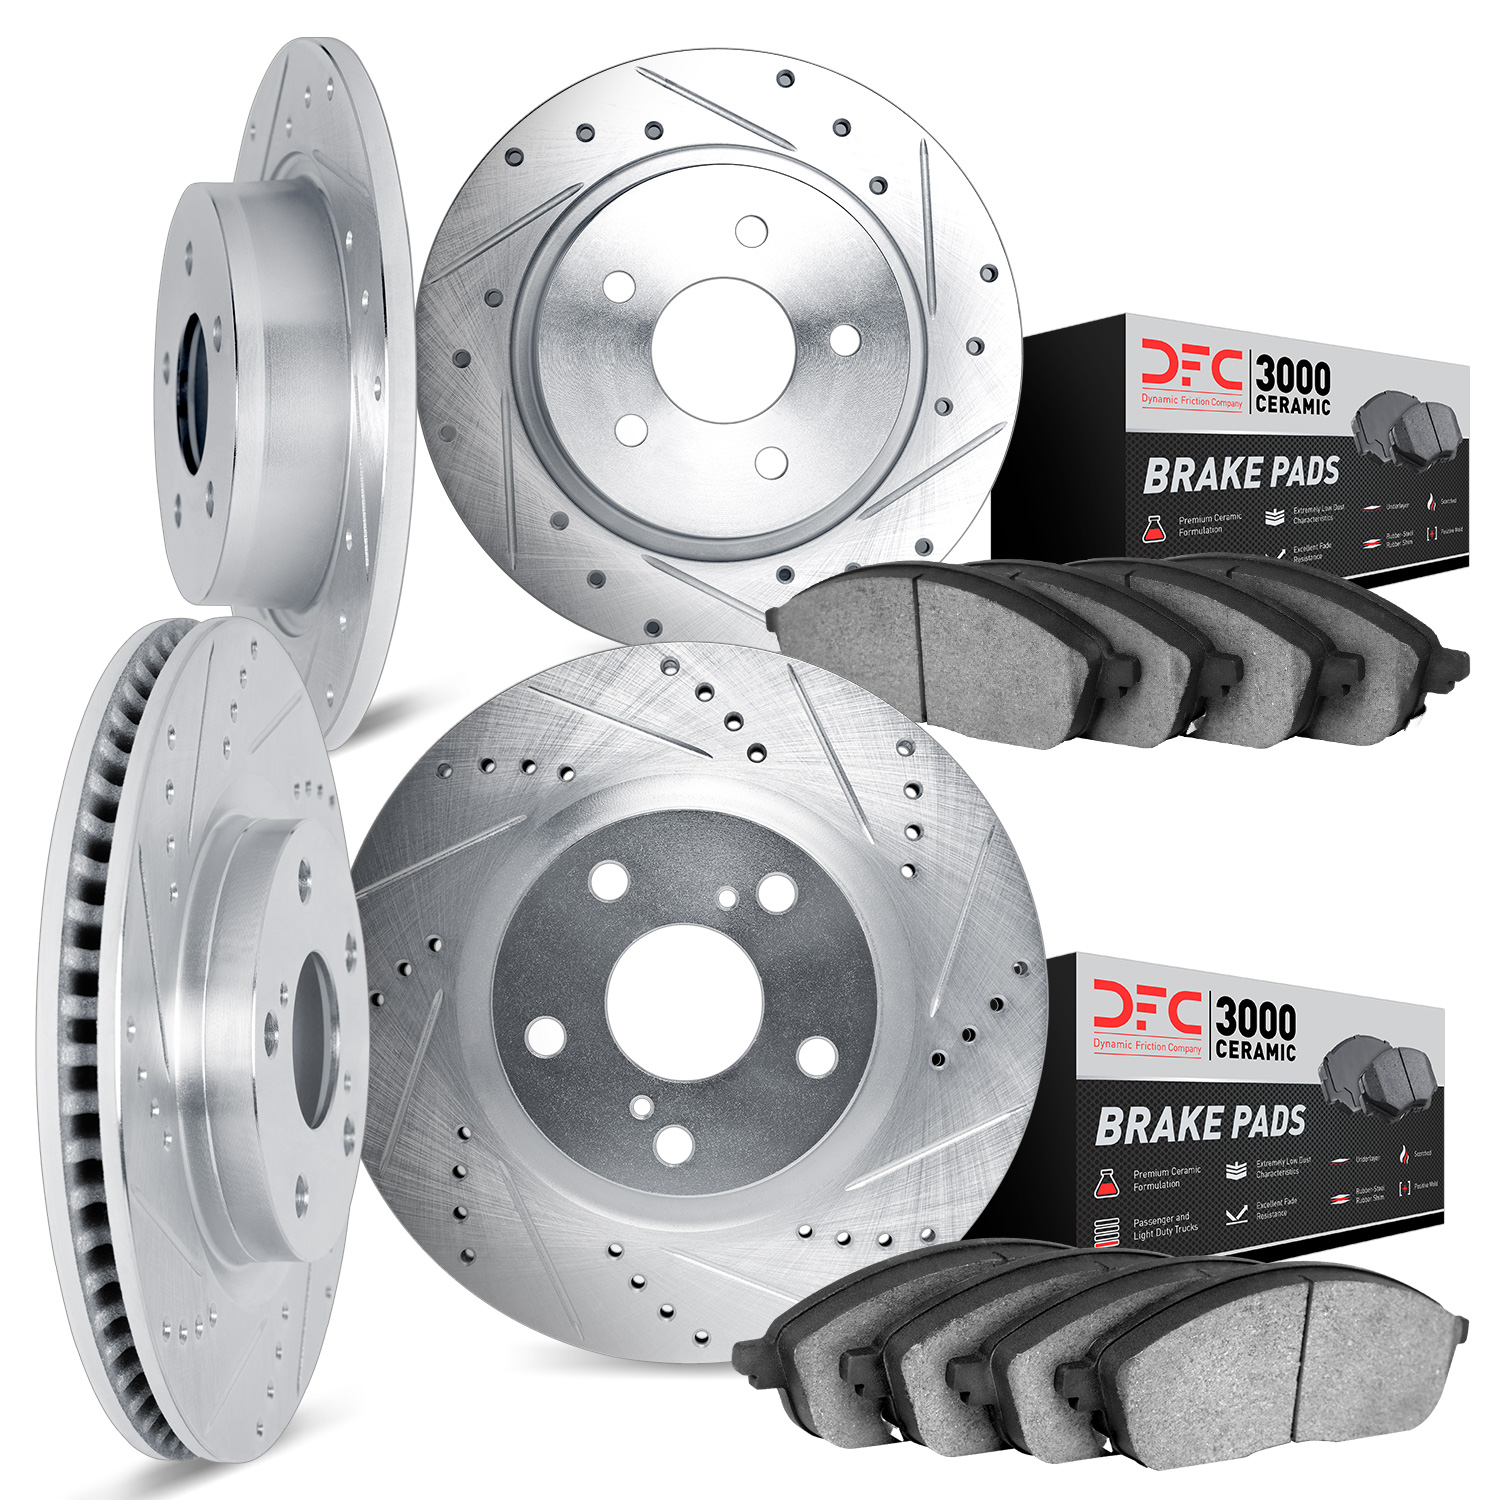 7304-40004 Drilled/Slotted Brake Rotor with 3000-Series Ceramic Brake Pads Kit [Silver], 1989-1990 Mopar, Position: Front and Re